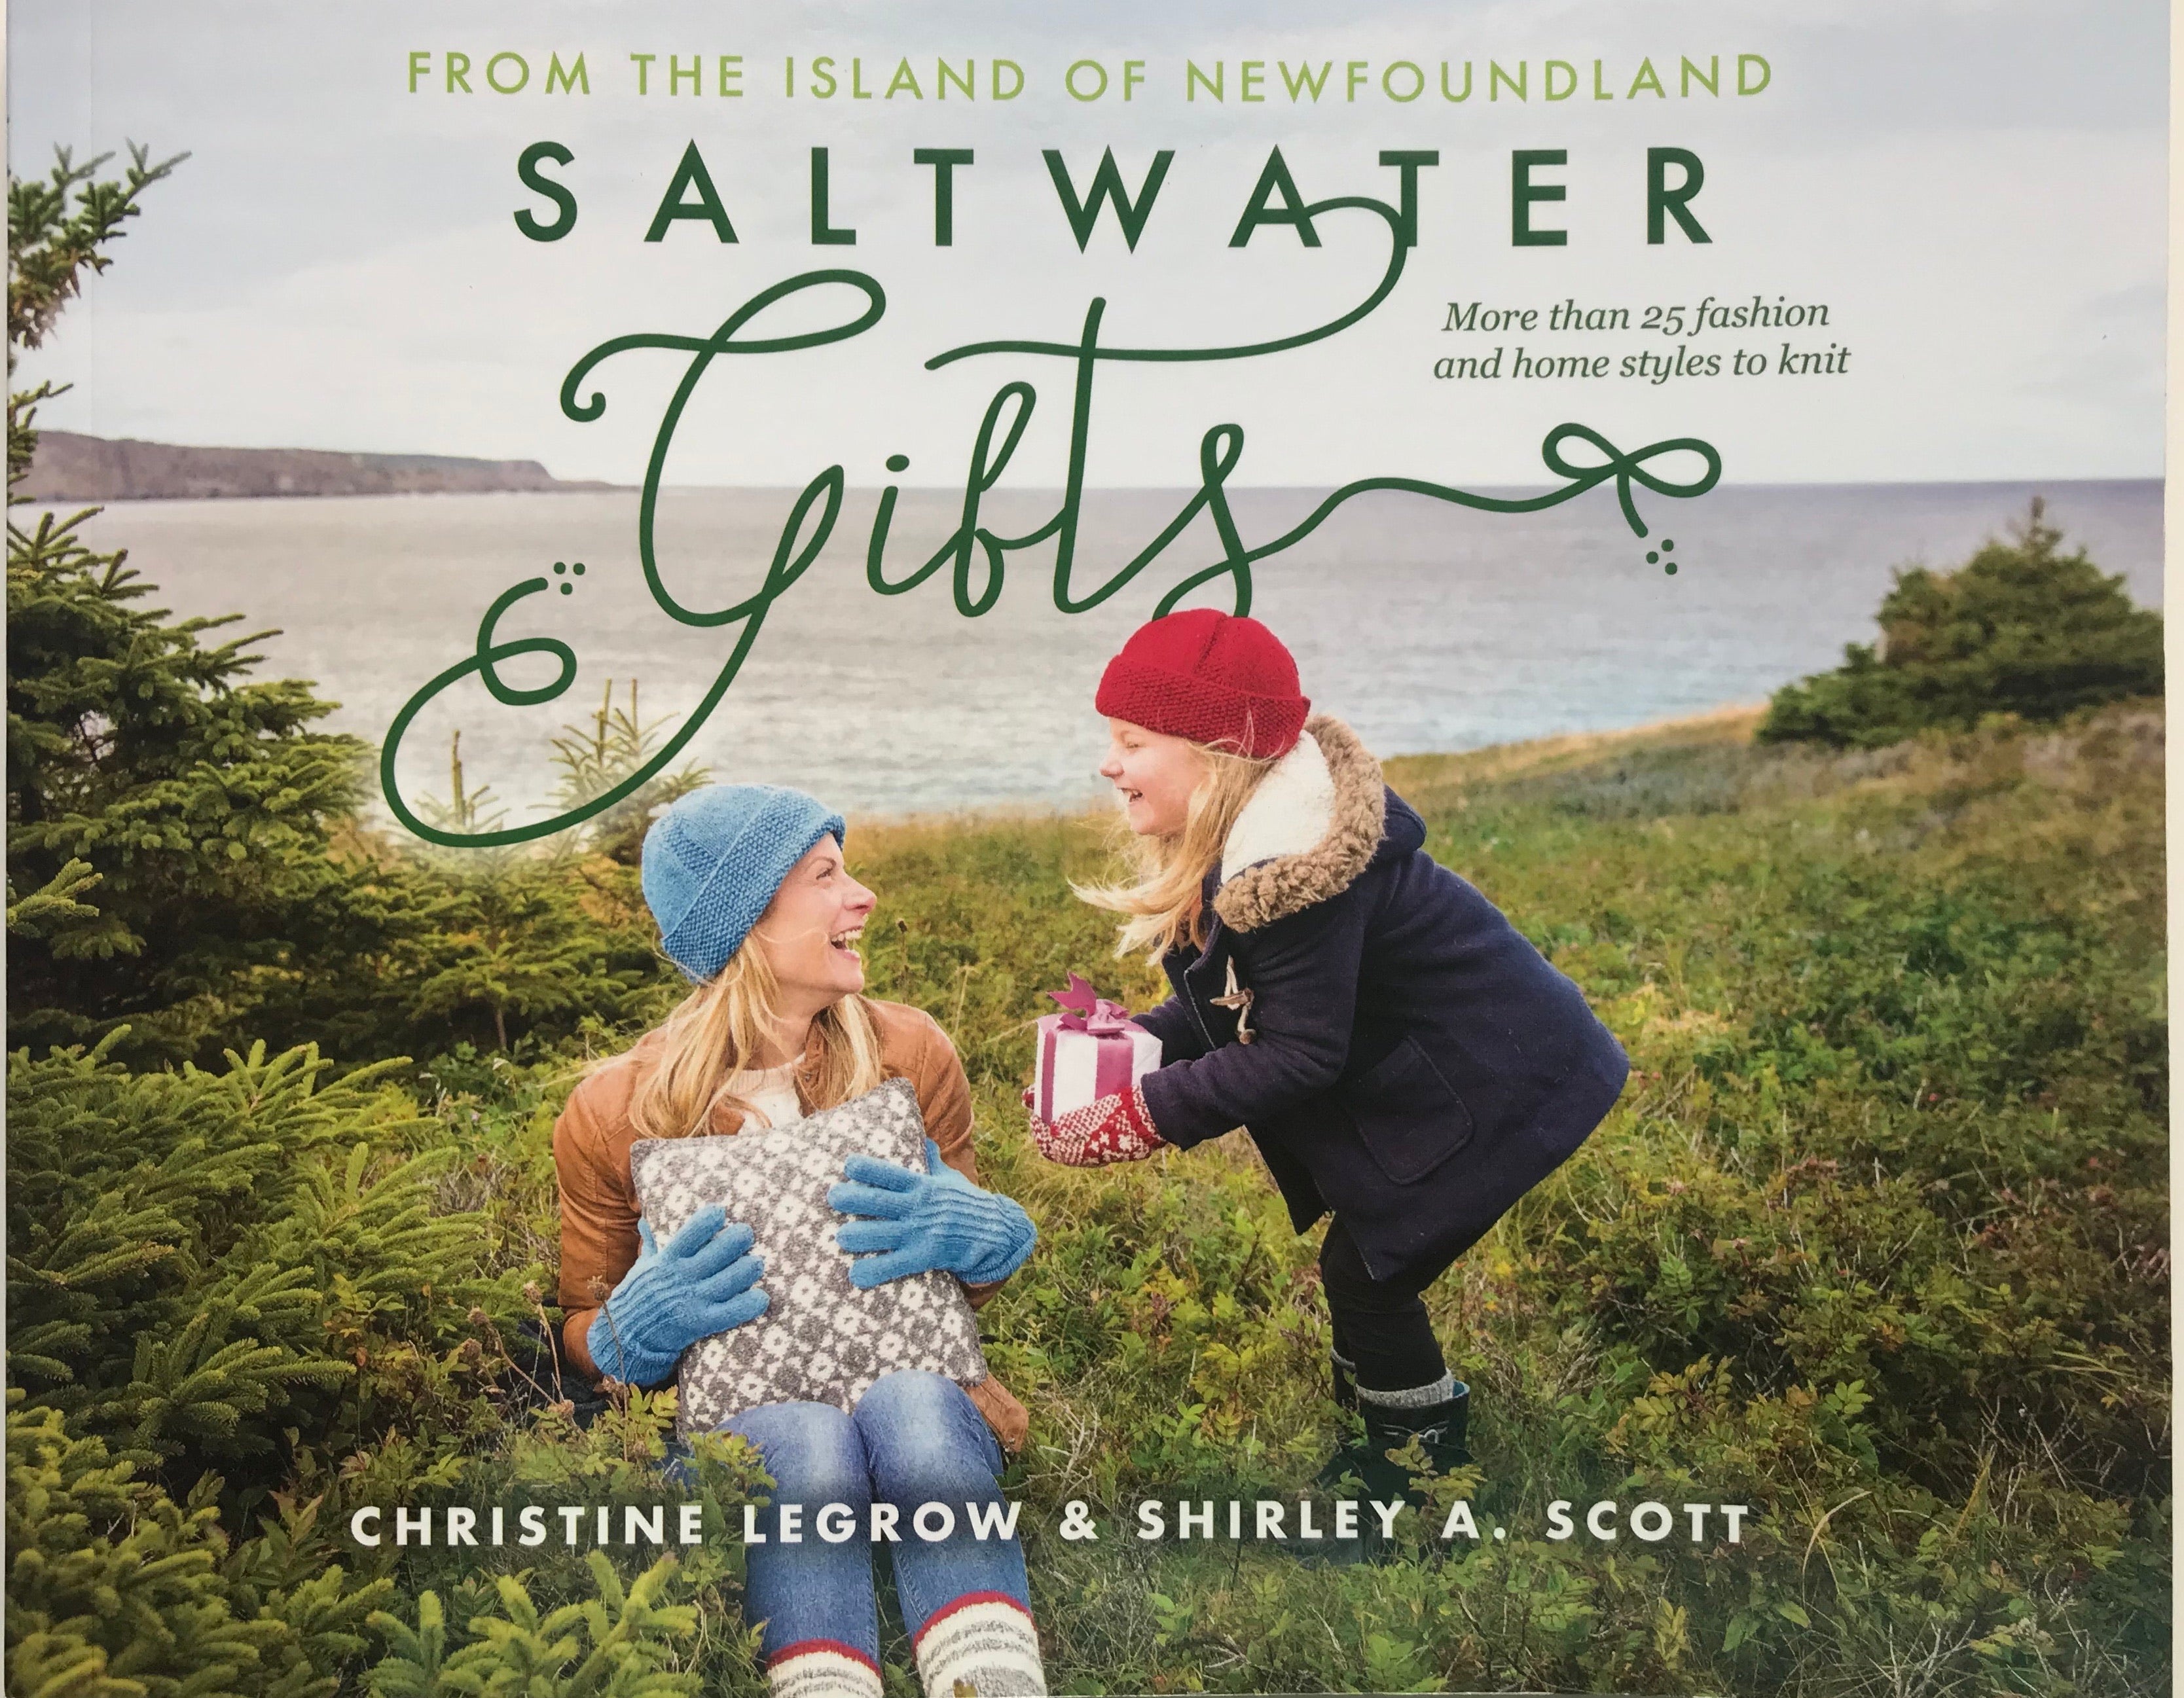 Saltwater Gifts by Christine LeGrow and Shirley A. Scott published by Boulder Books